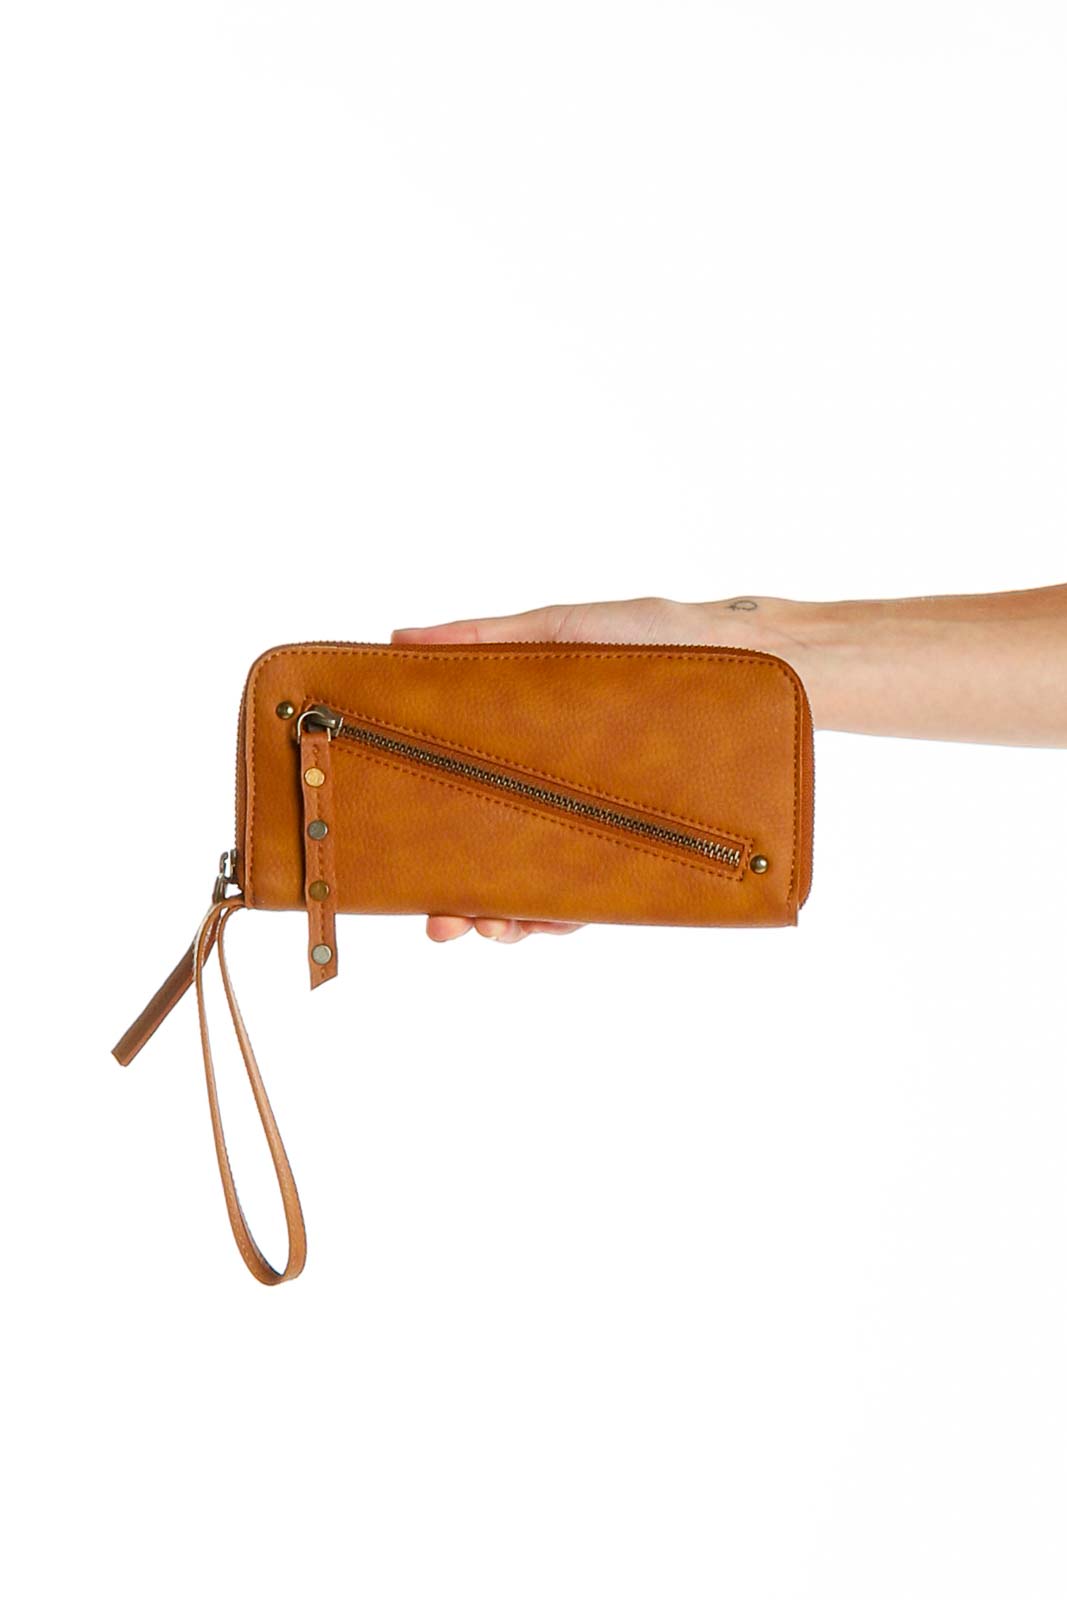 Brown Vegan Leather Clutch Front